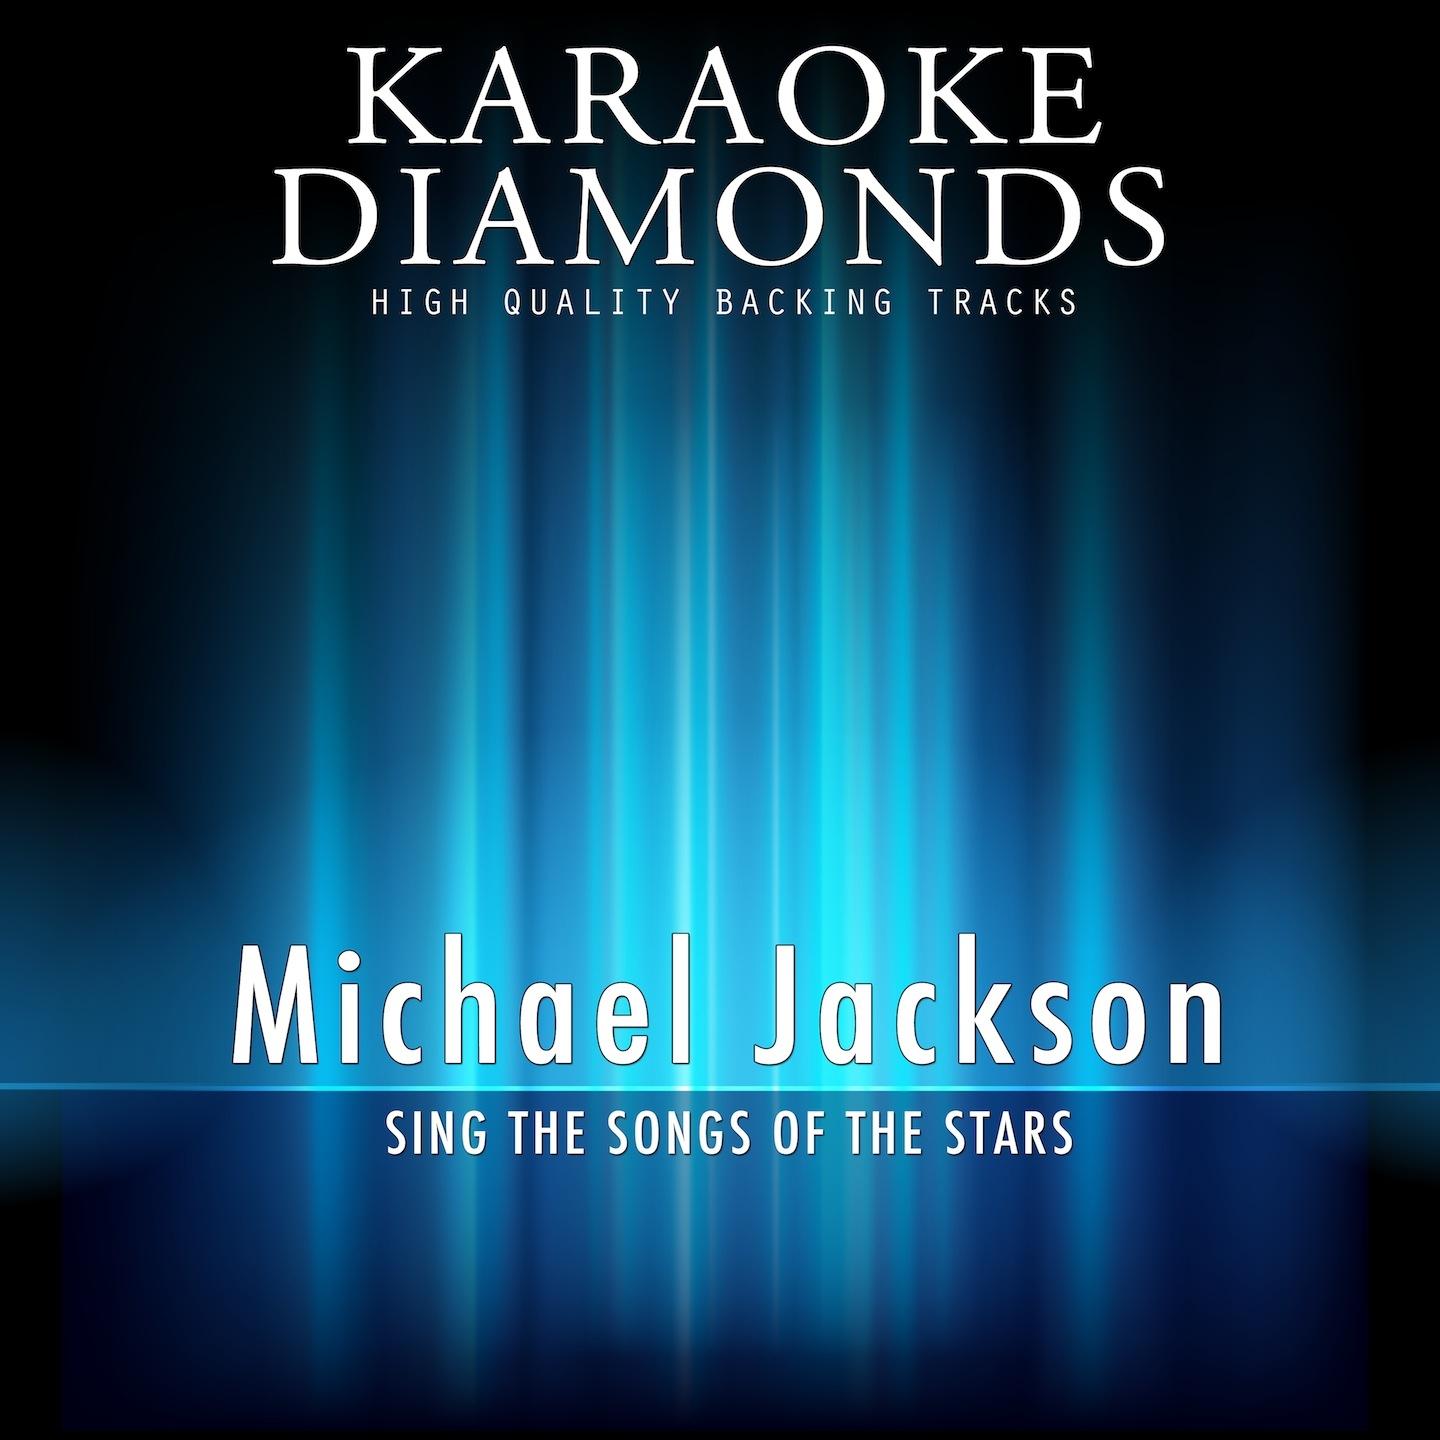 Rock With You (Karaoke Version In the Style of Michael Jackson)